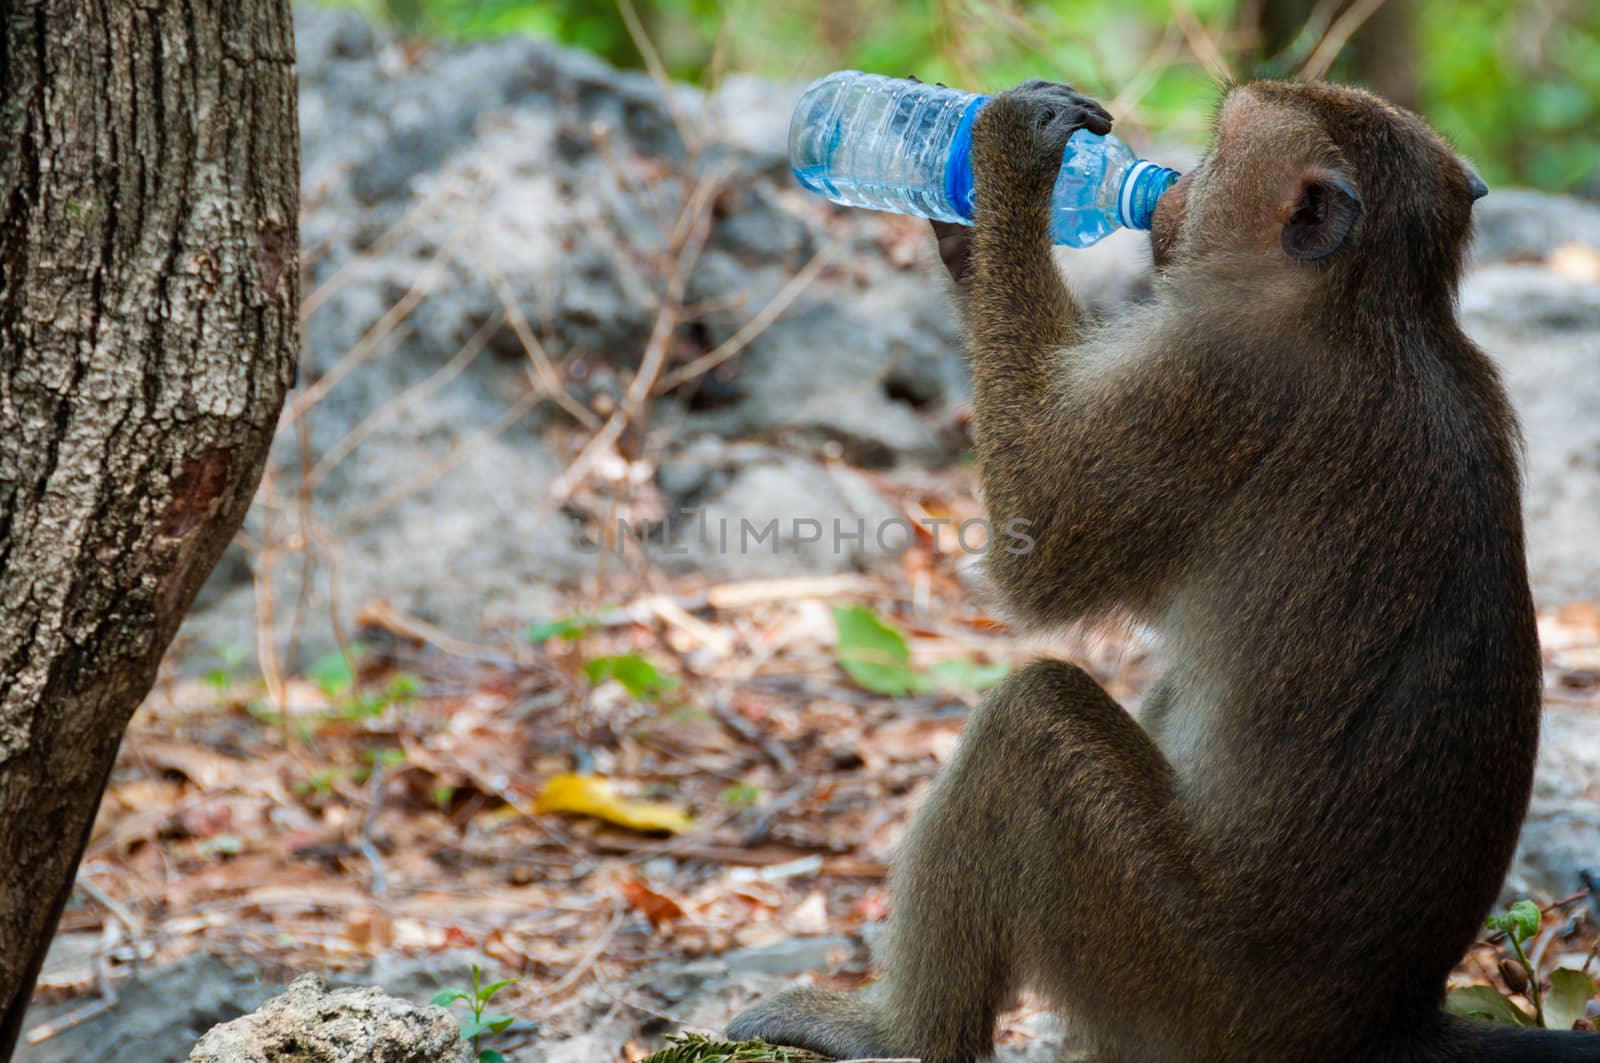 Monkey Rhesus Macaque drinking from a water bottle in Cambodia Asia